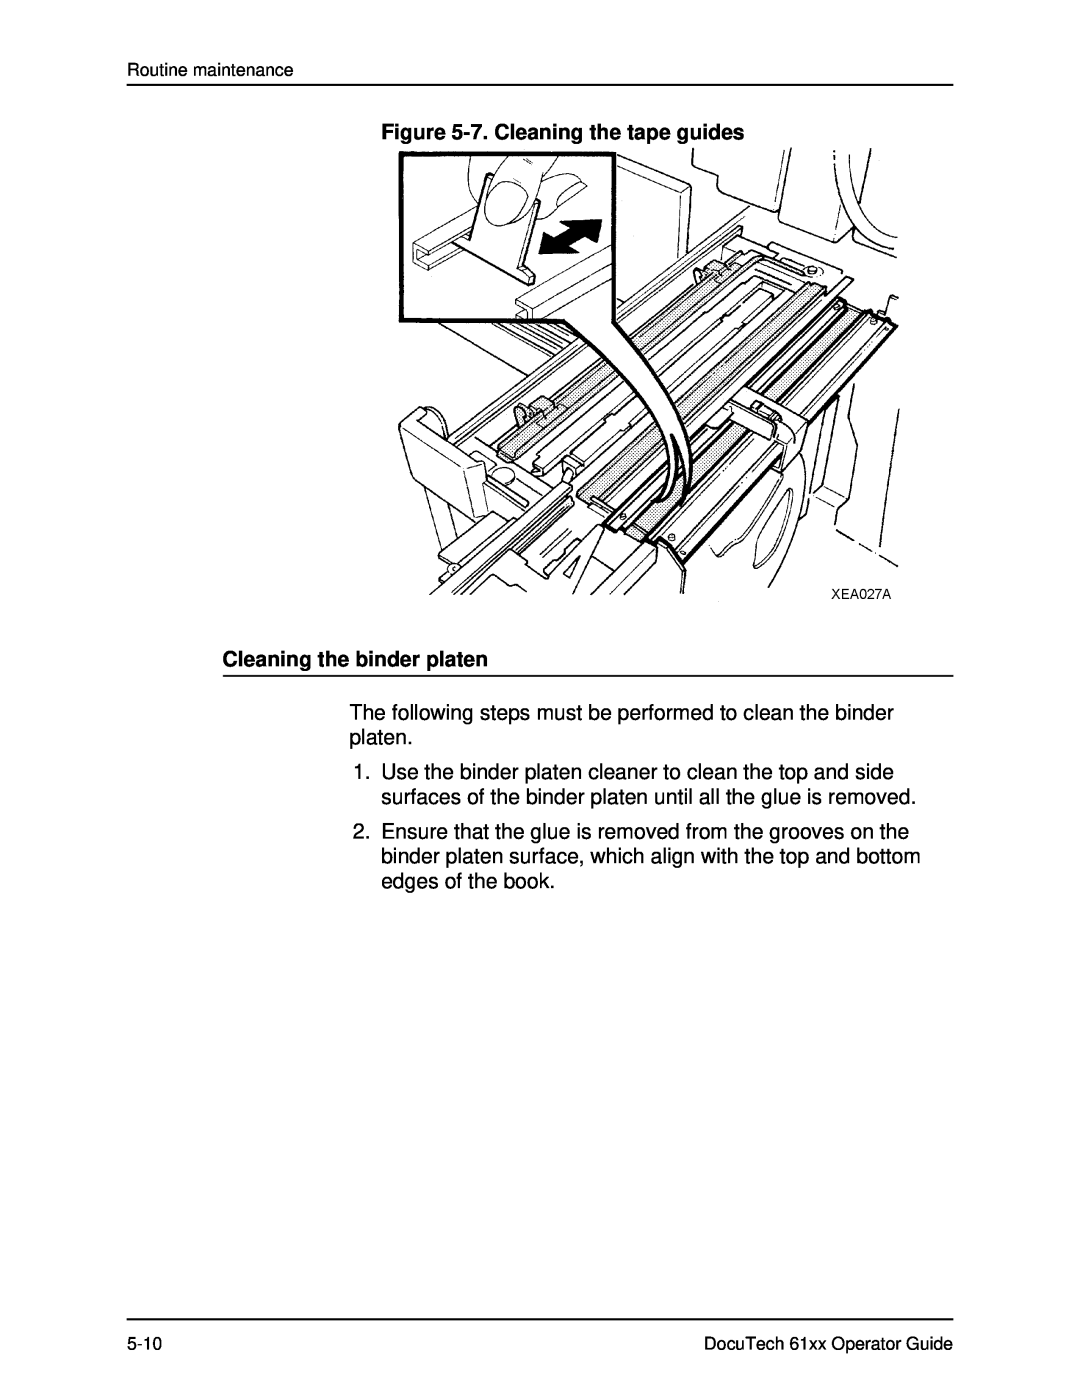 Xerox 61xx manual 7. Cleaning the tape guides Cleaning the binder platen 